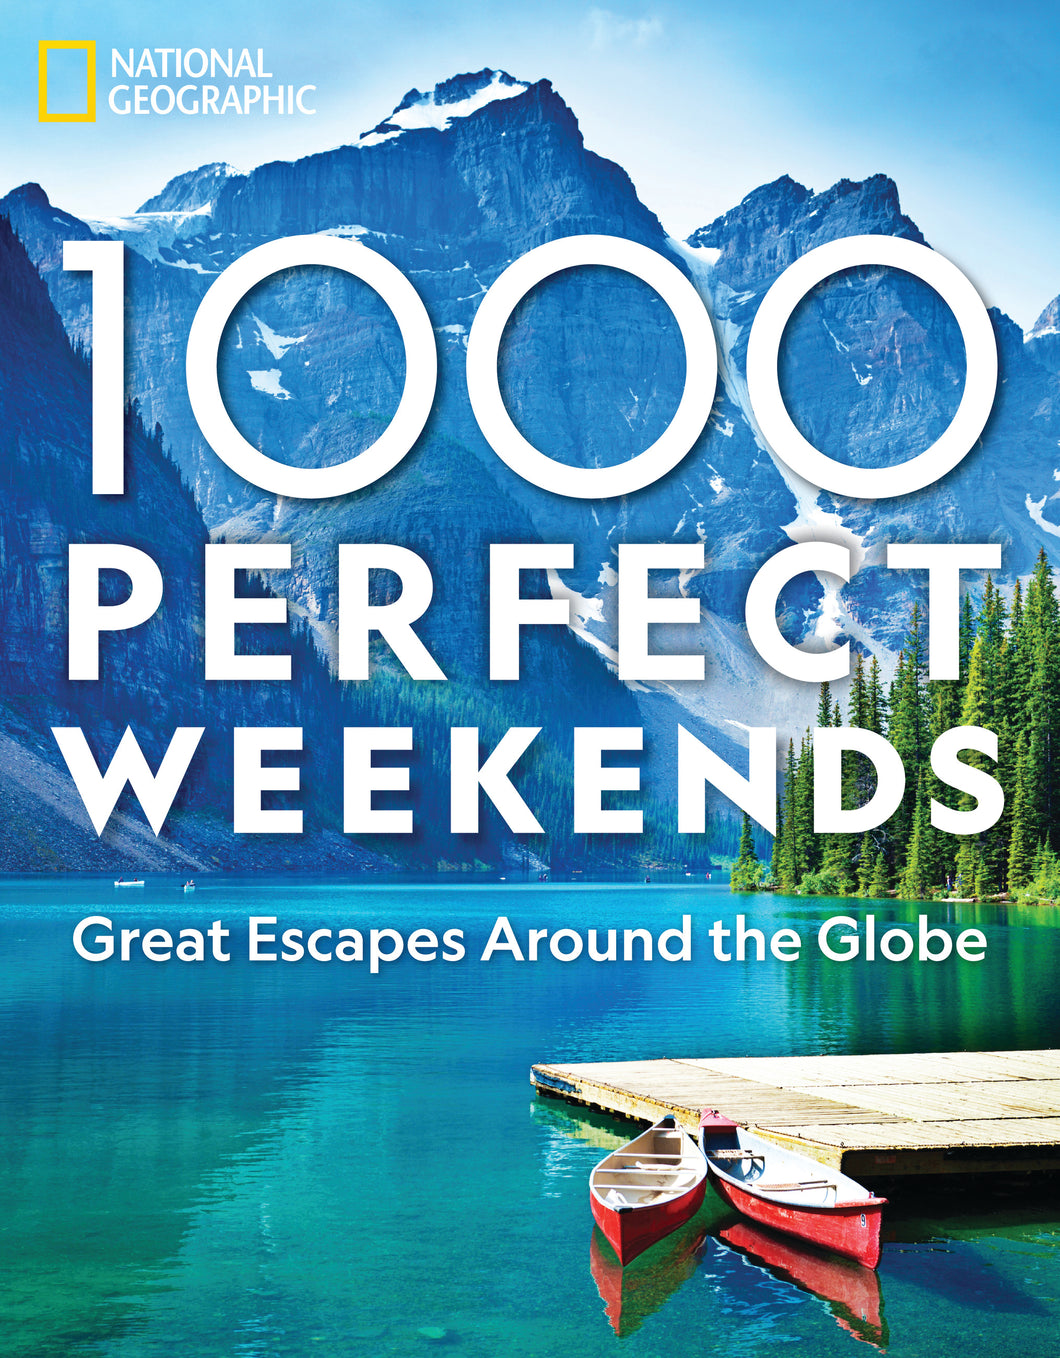 National Geographic 1,000 PERFECT WEEKENDS